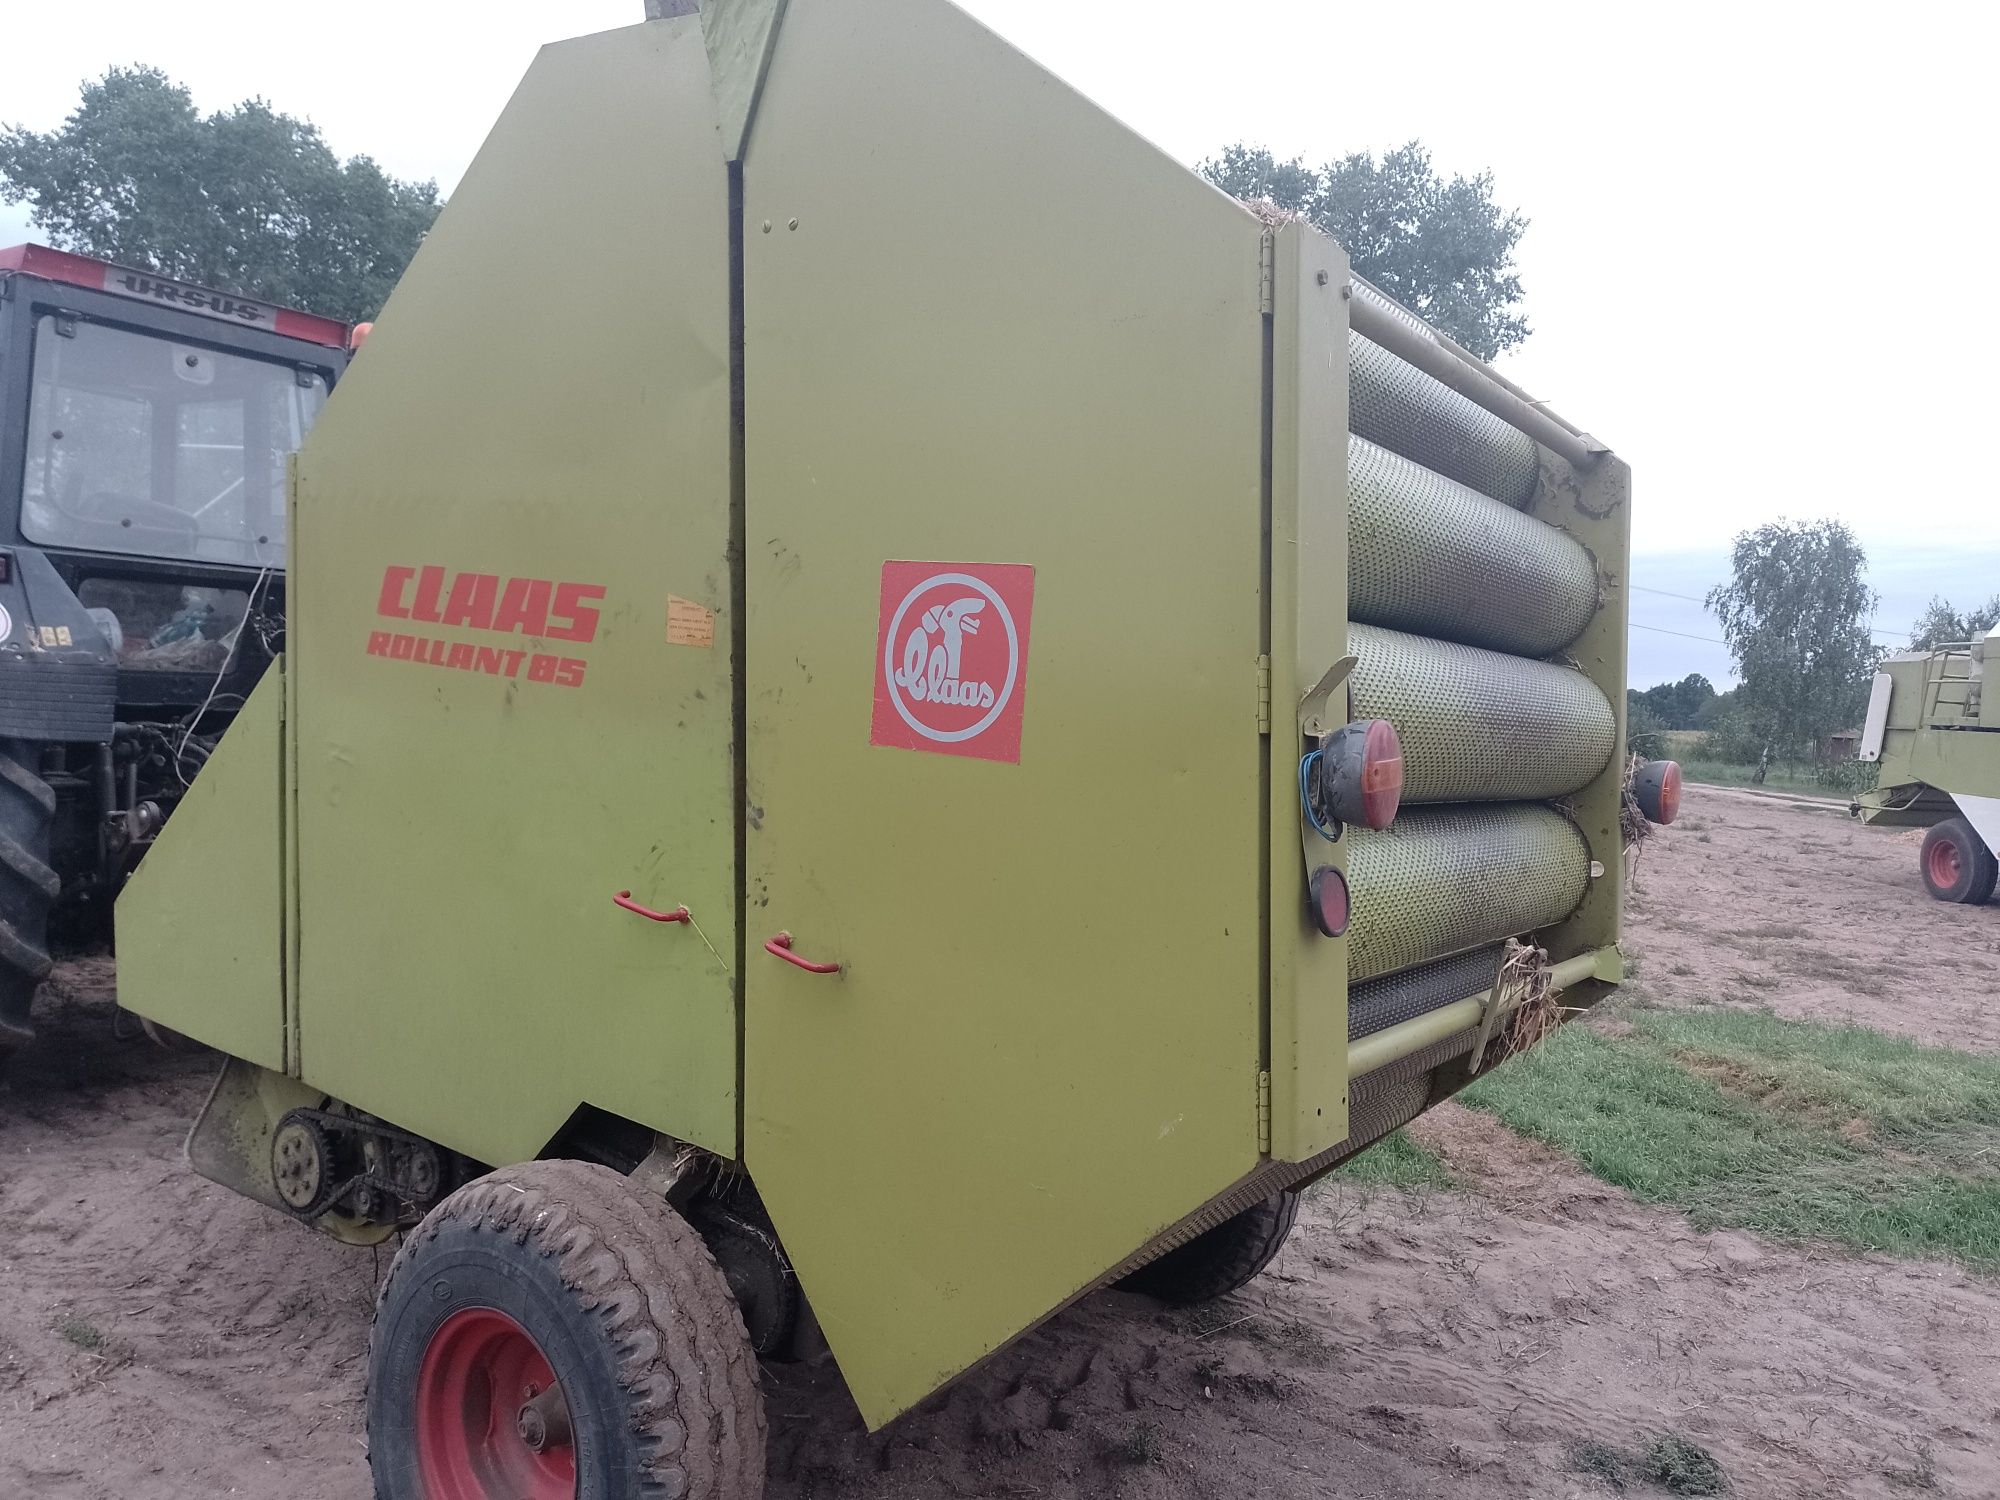 Claas Rolland 85